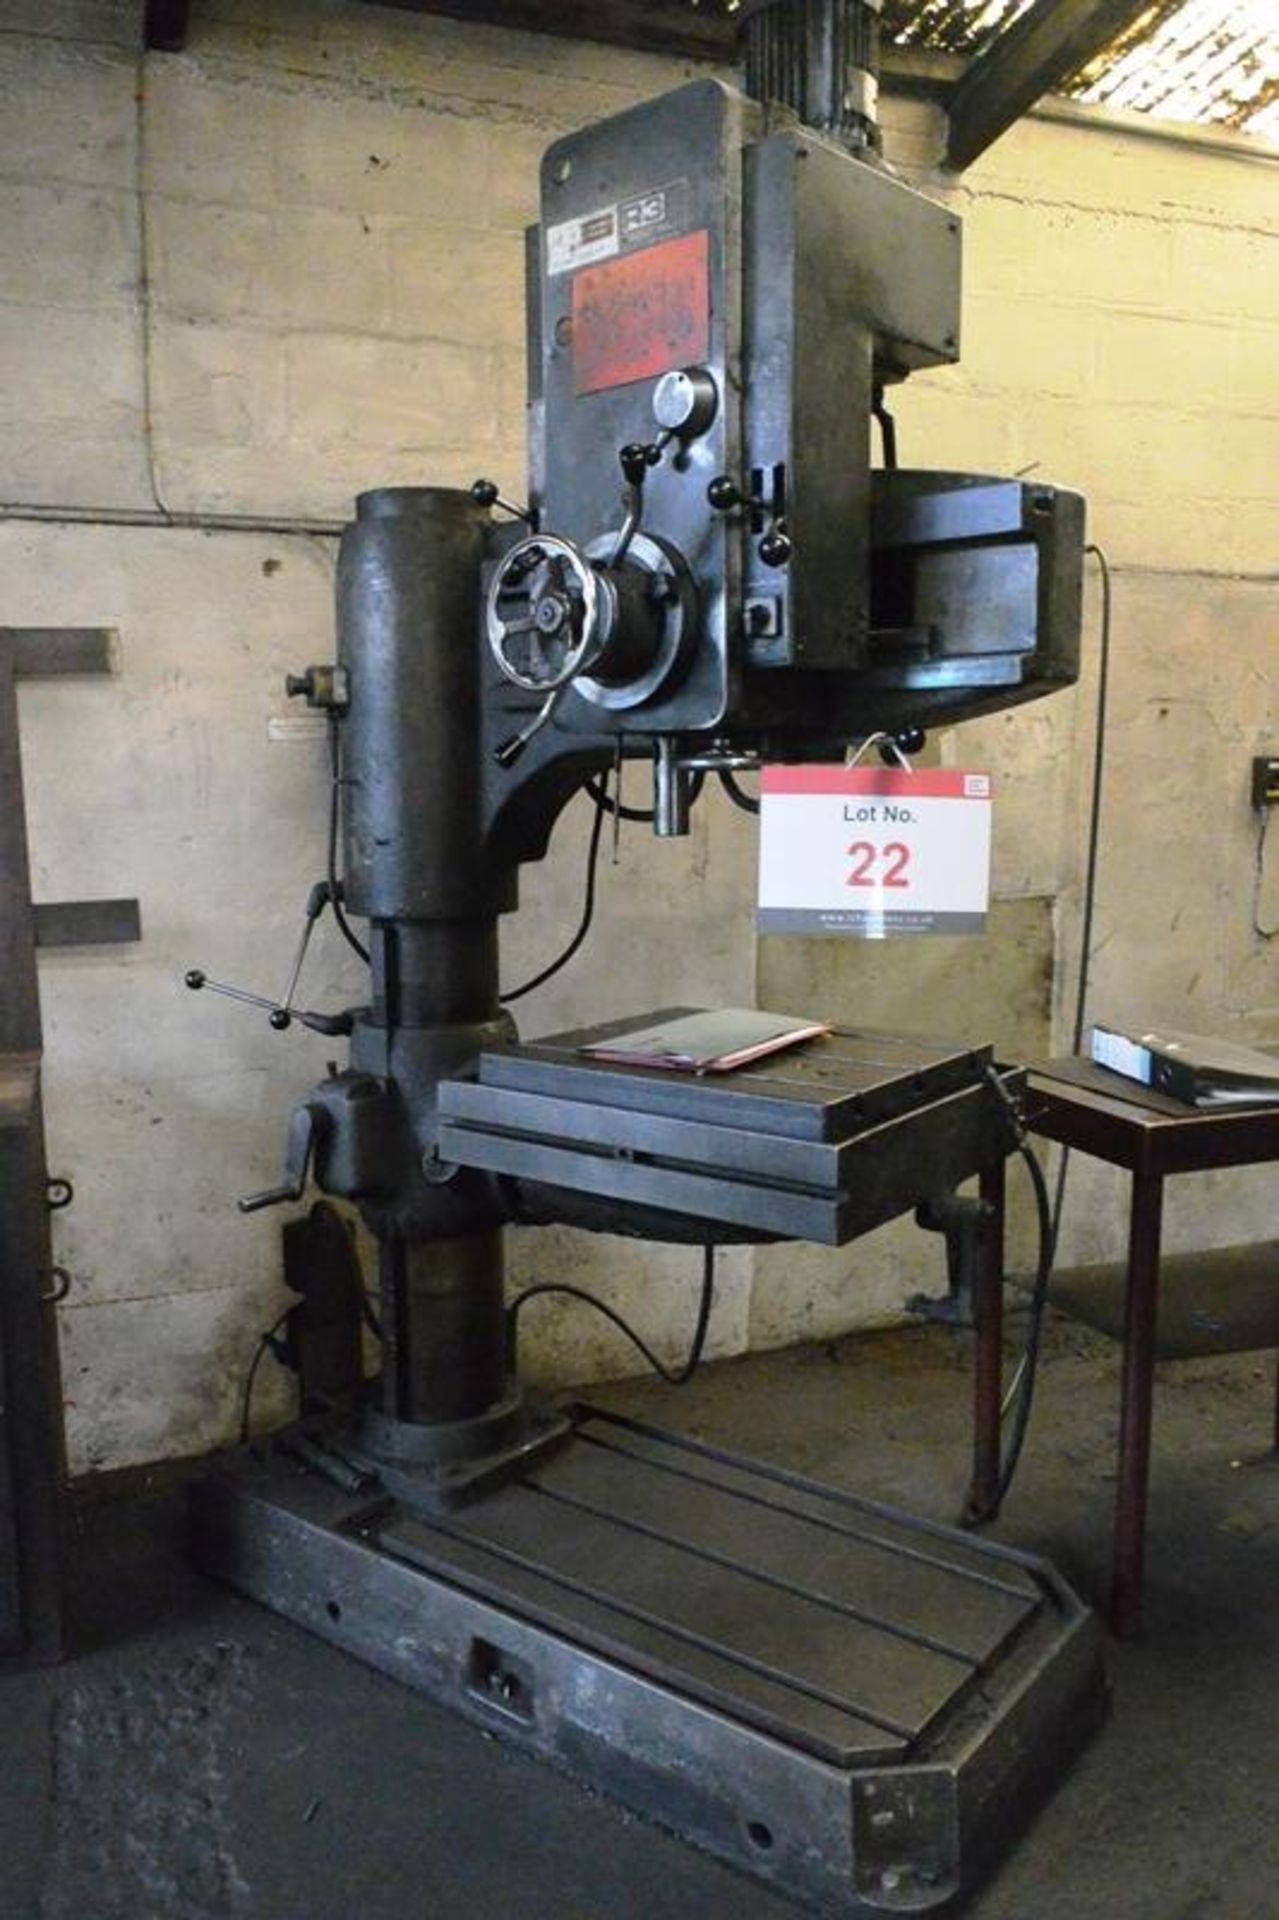 Qualters & Smith R3 radial arm drill, serial no. 1100, 50 - 1750 rpm spindle speeds, 36" swing